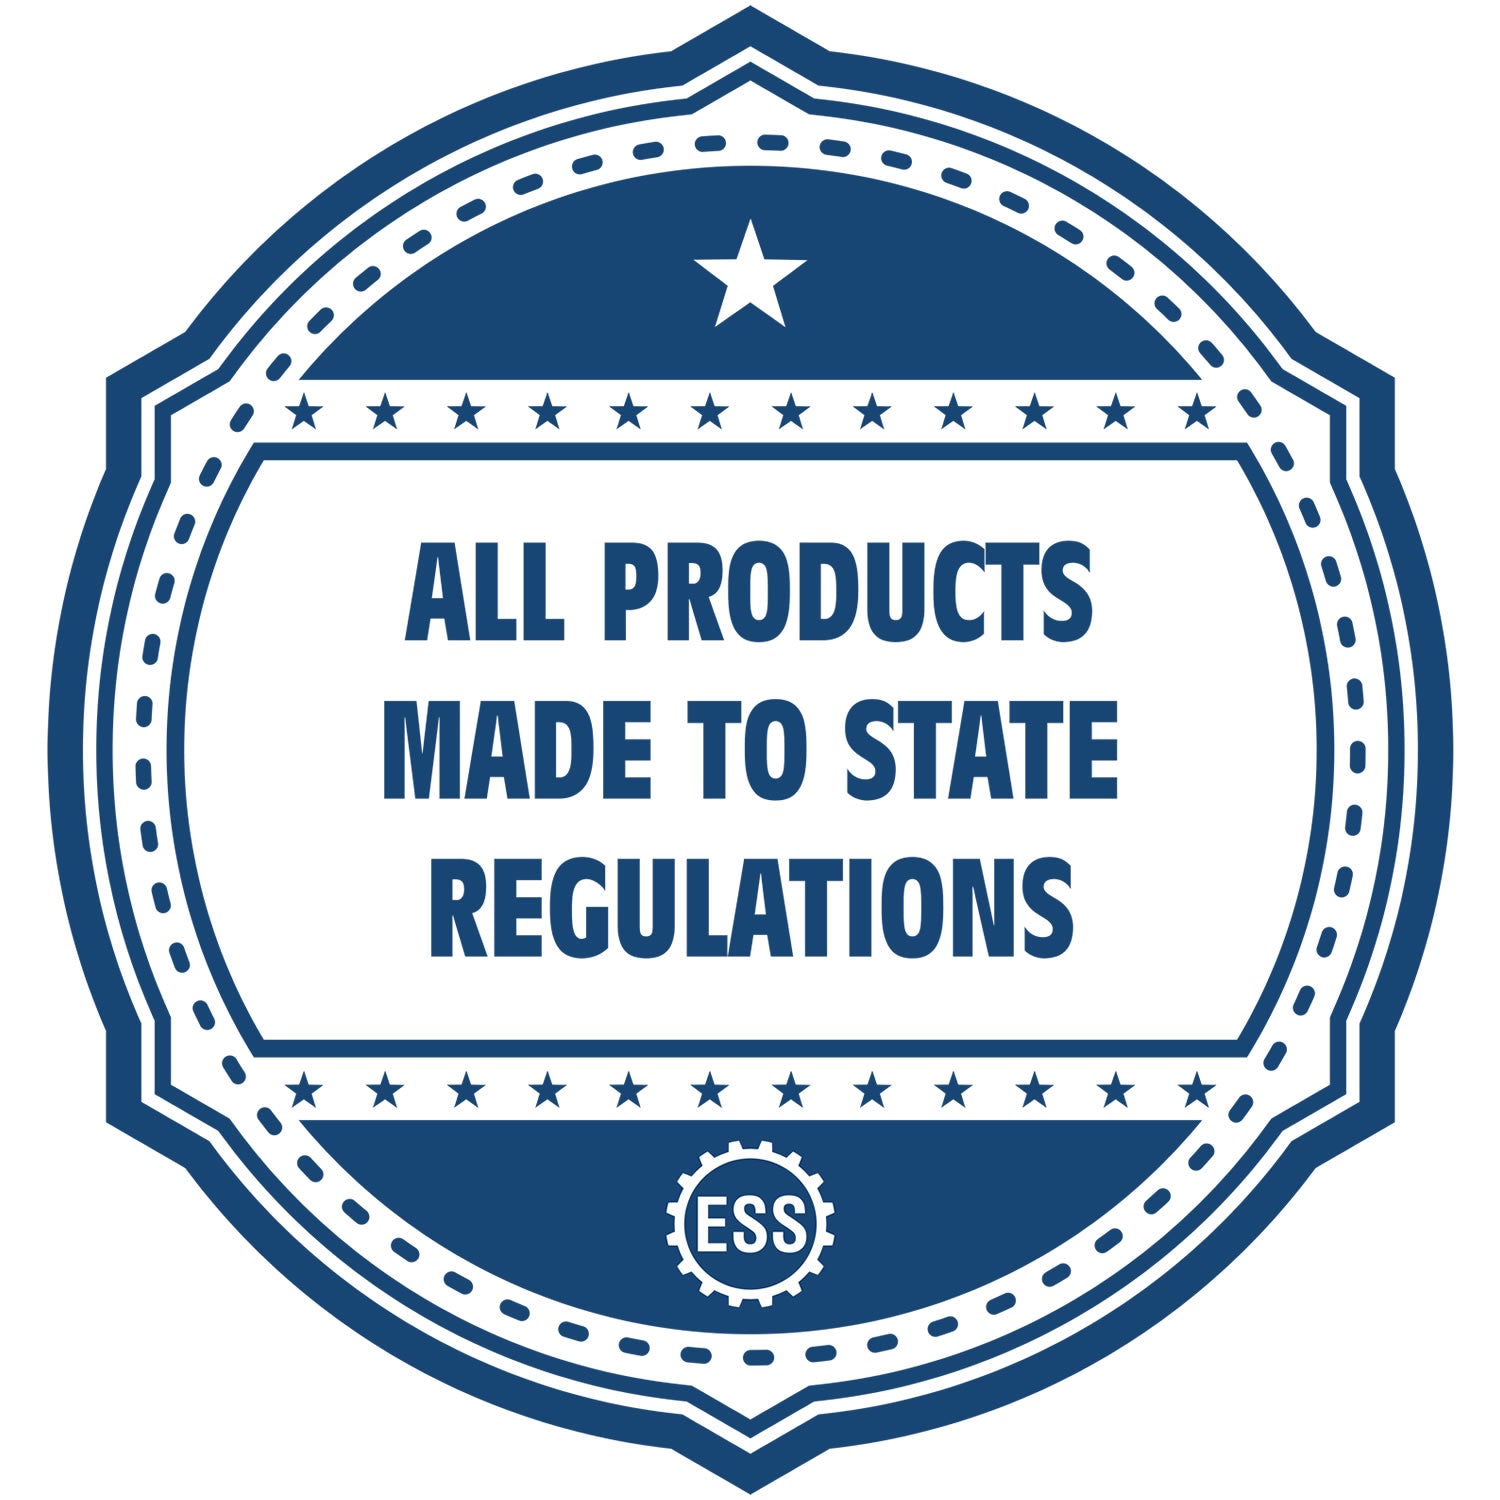 An icon or badge element for the Self-Inking Delaware PE Stamp showing that this product is made in compliance with state regulations.